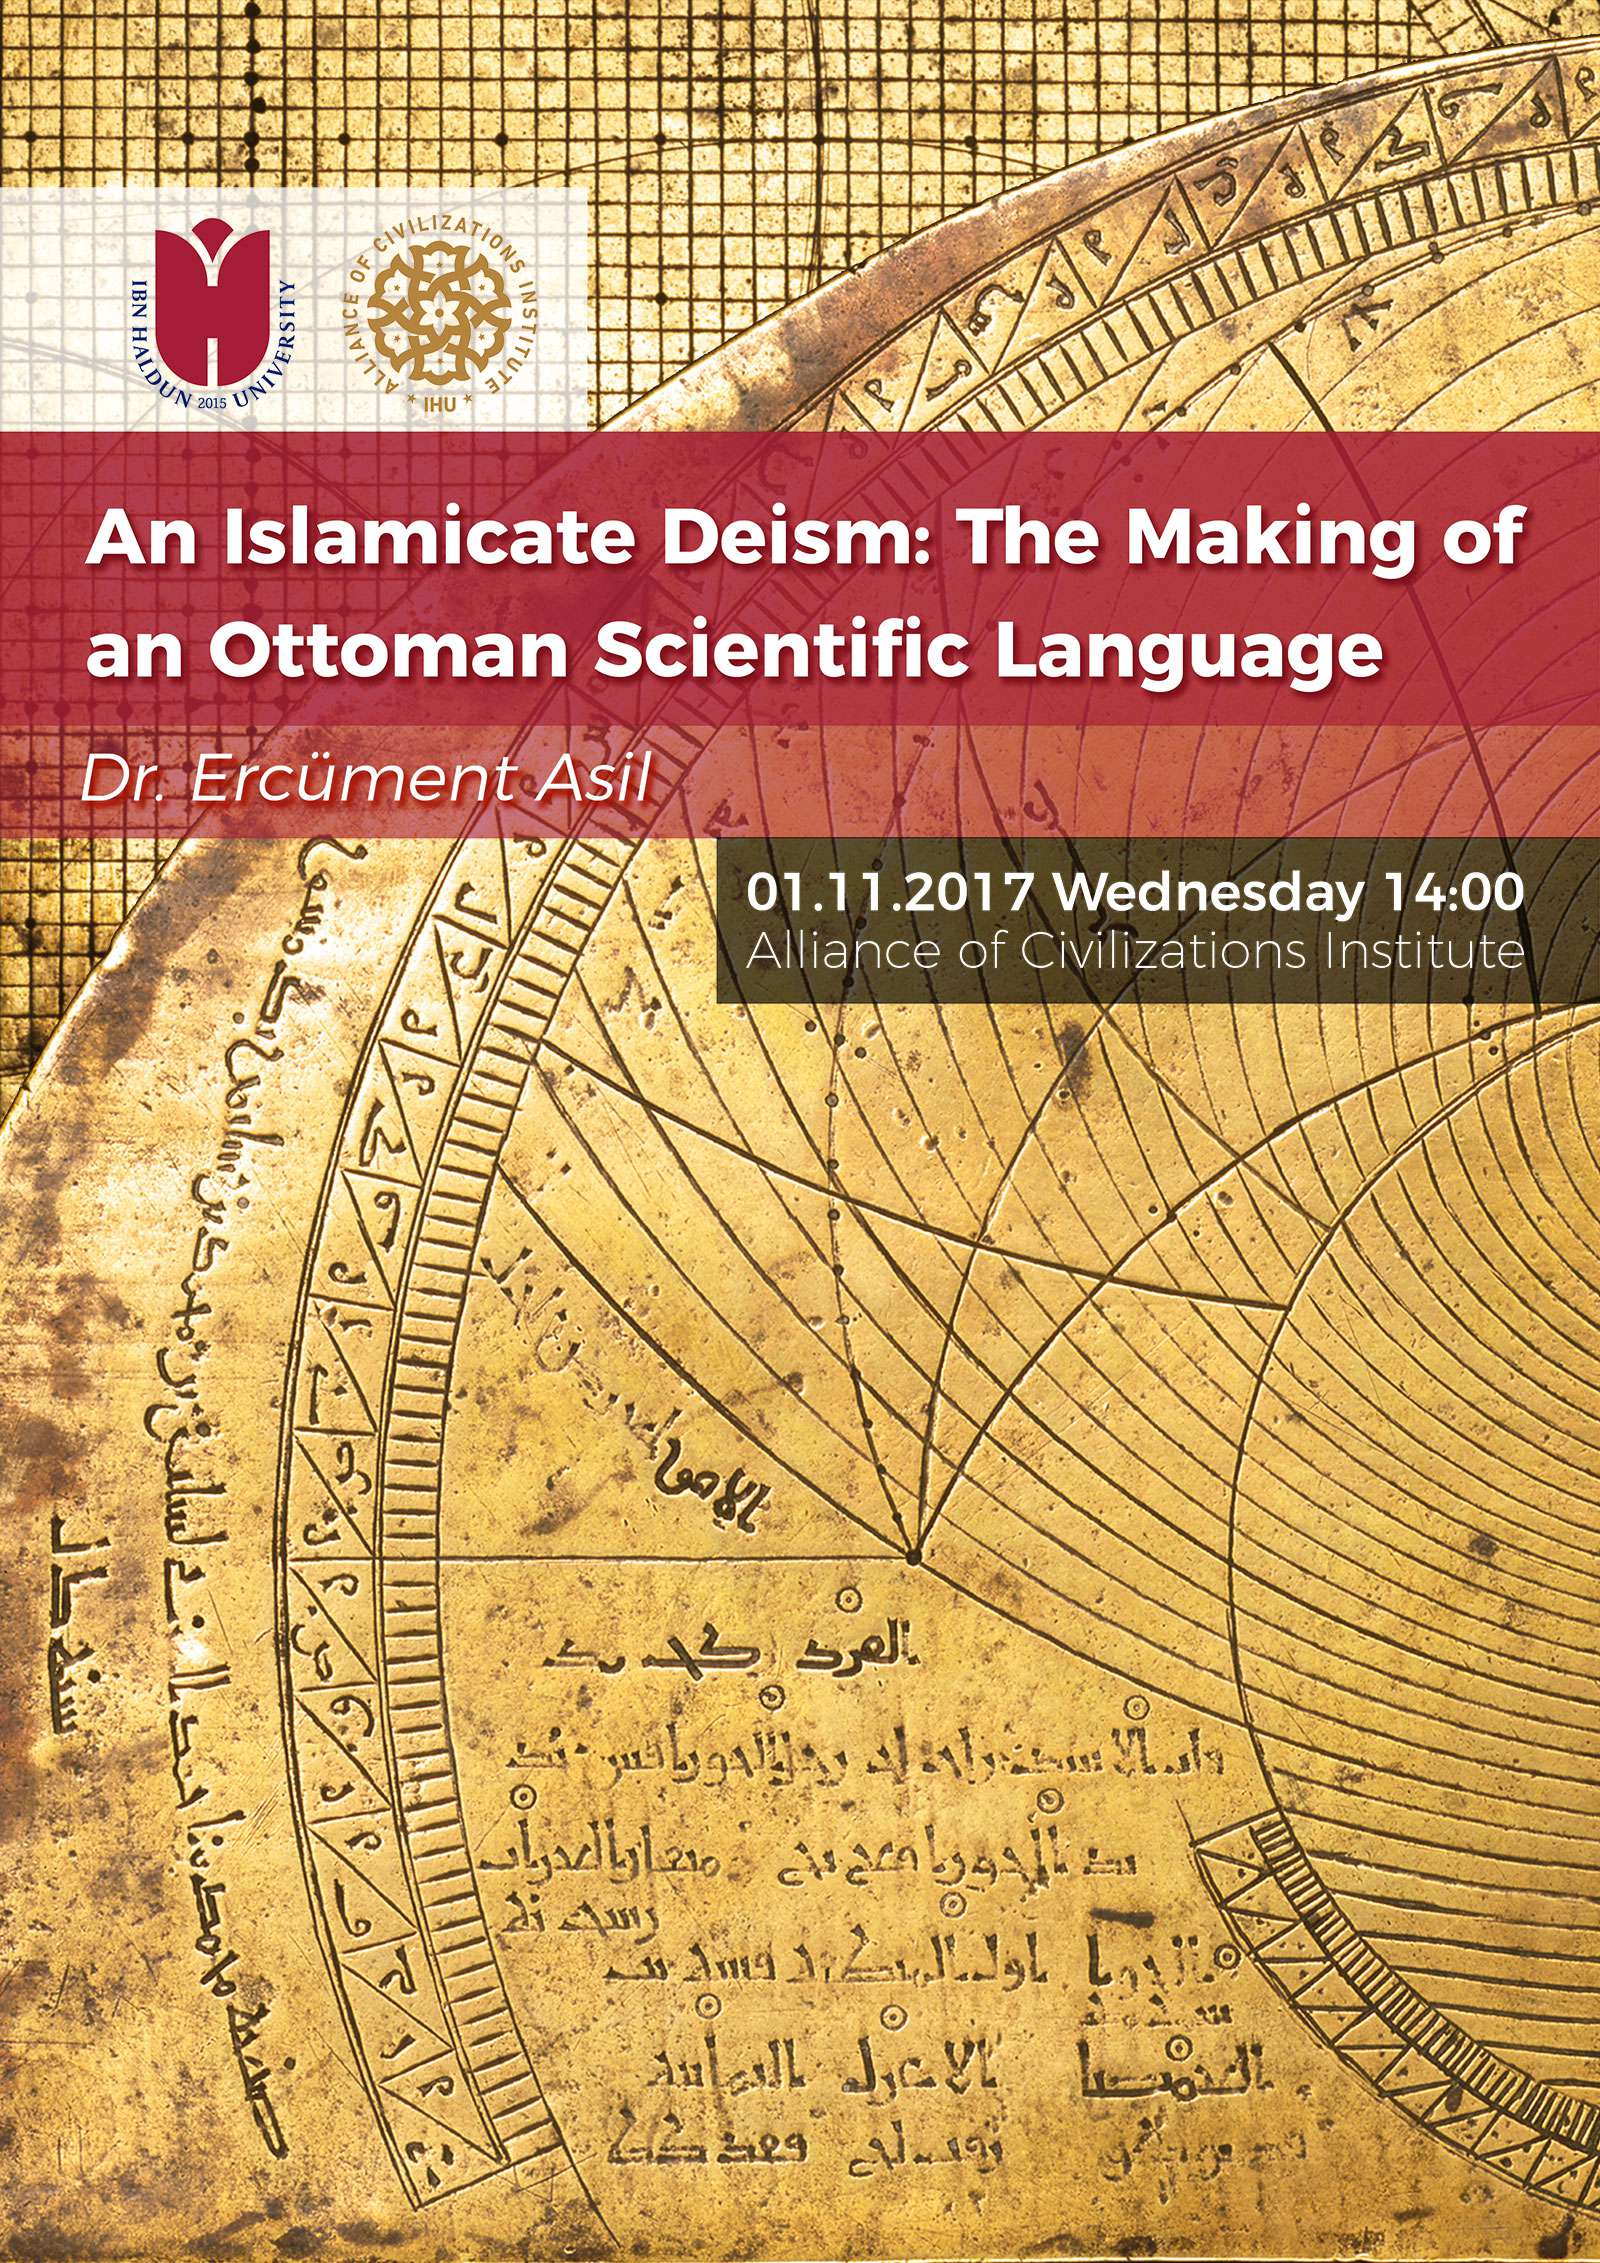 An Islamicate Deism: The Making of an Ottoman Scientific Language